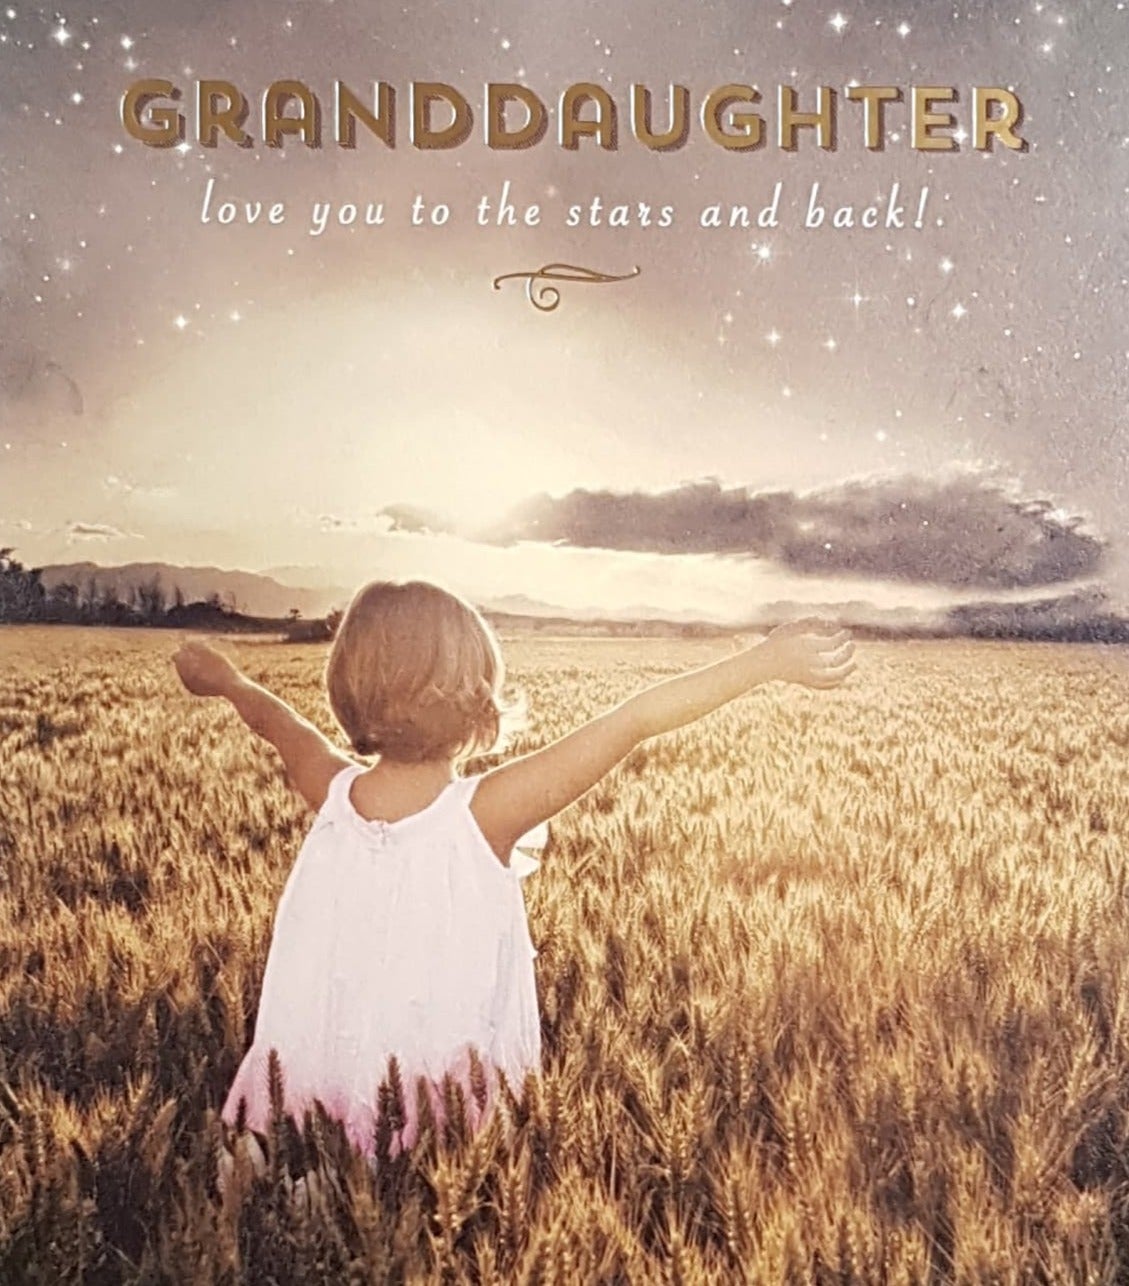 Birthday Card - Granddaughter / A Little Girl In A Wheat Field